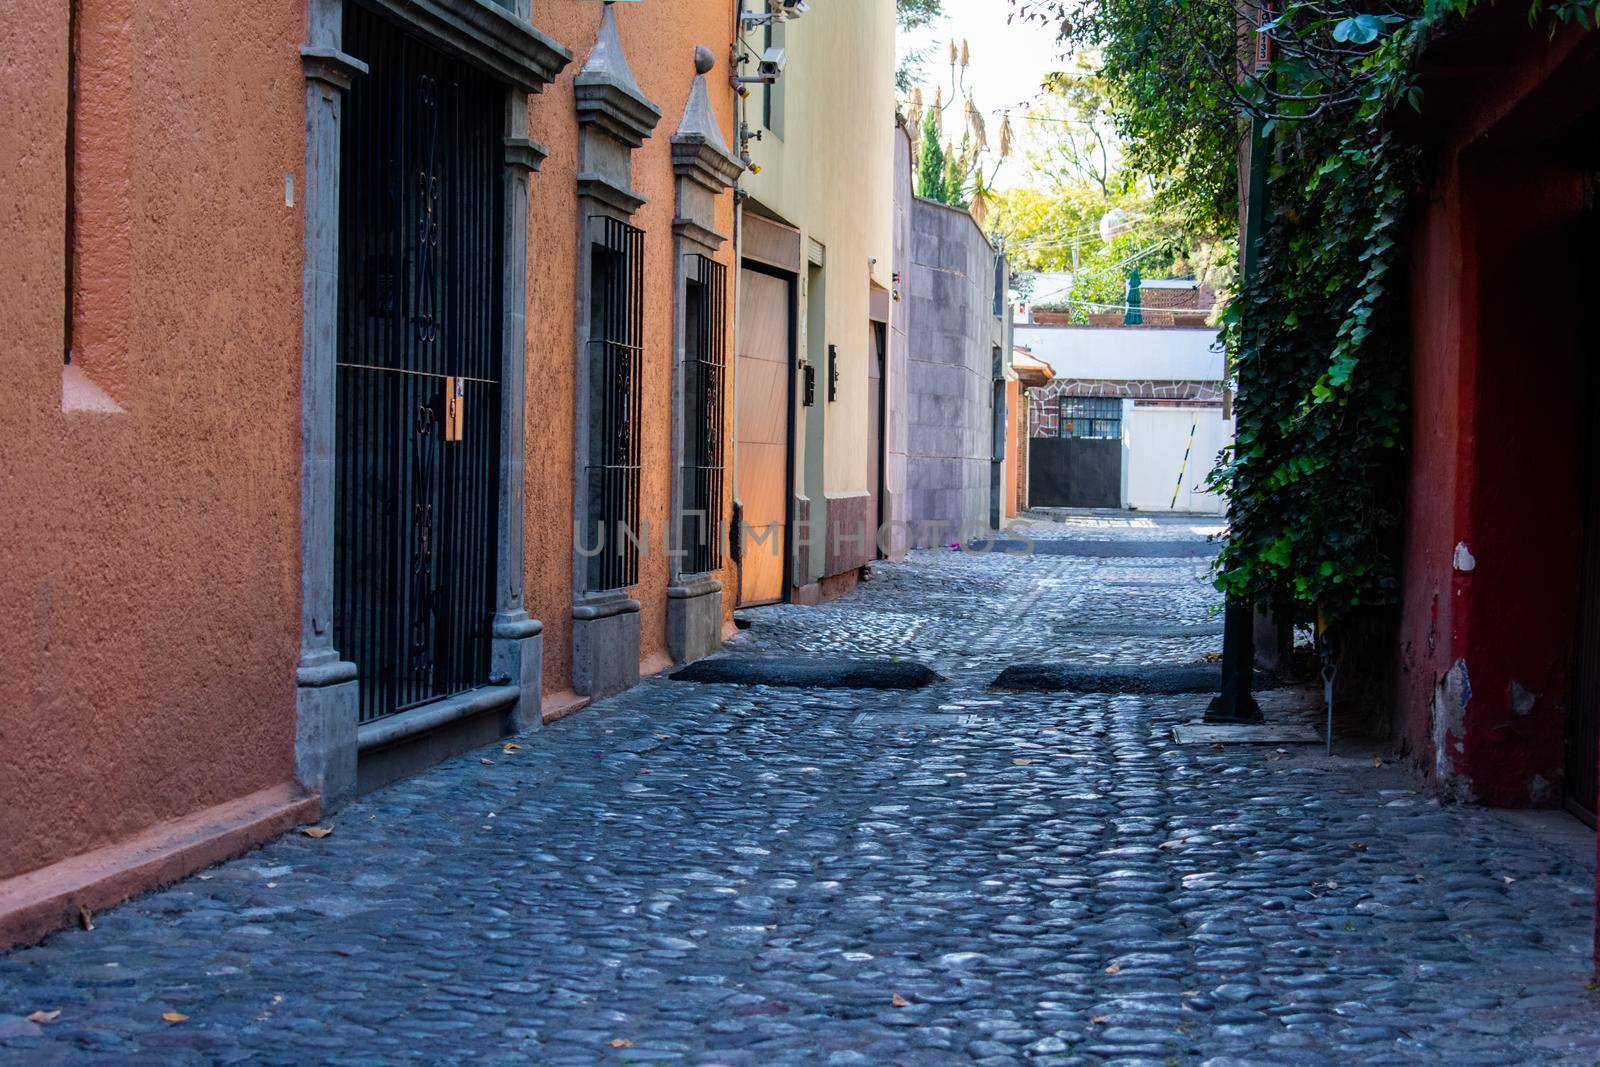 Colorful houses and bushes in empty cobbled alley from Mexico City. Narrow path surrounded by classic Hispanic homes and nature. Colorful Mexican neighborhood